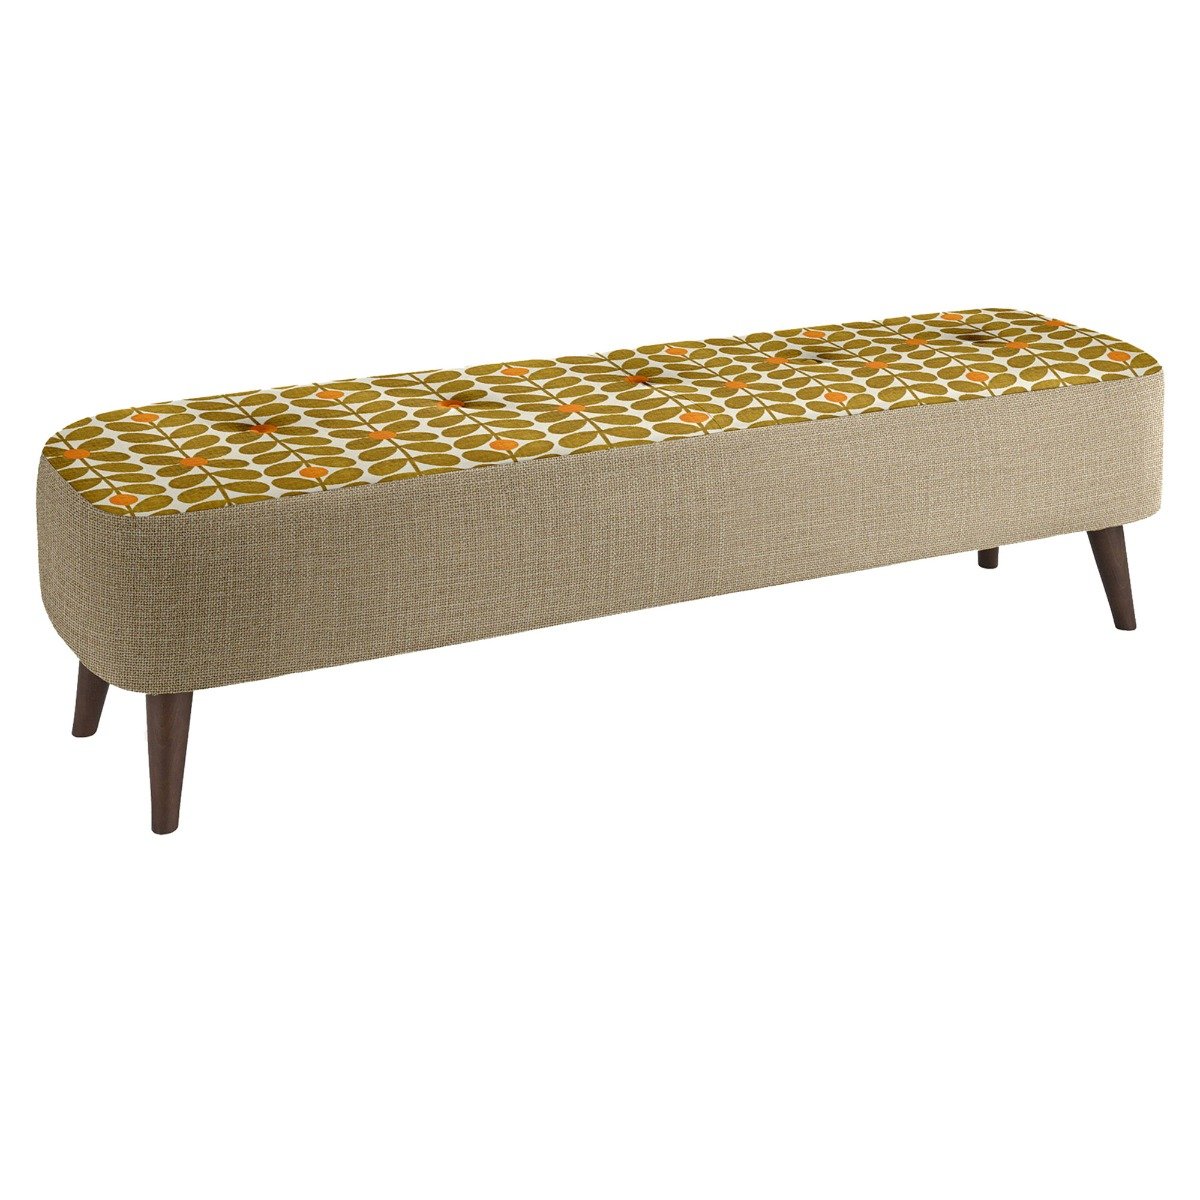 Orla Kiely Donegal Large Stool, Neutral Fabric | Barker & Stonehouse